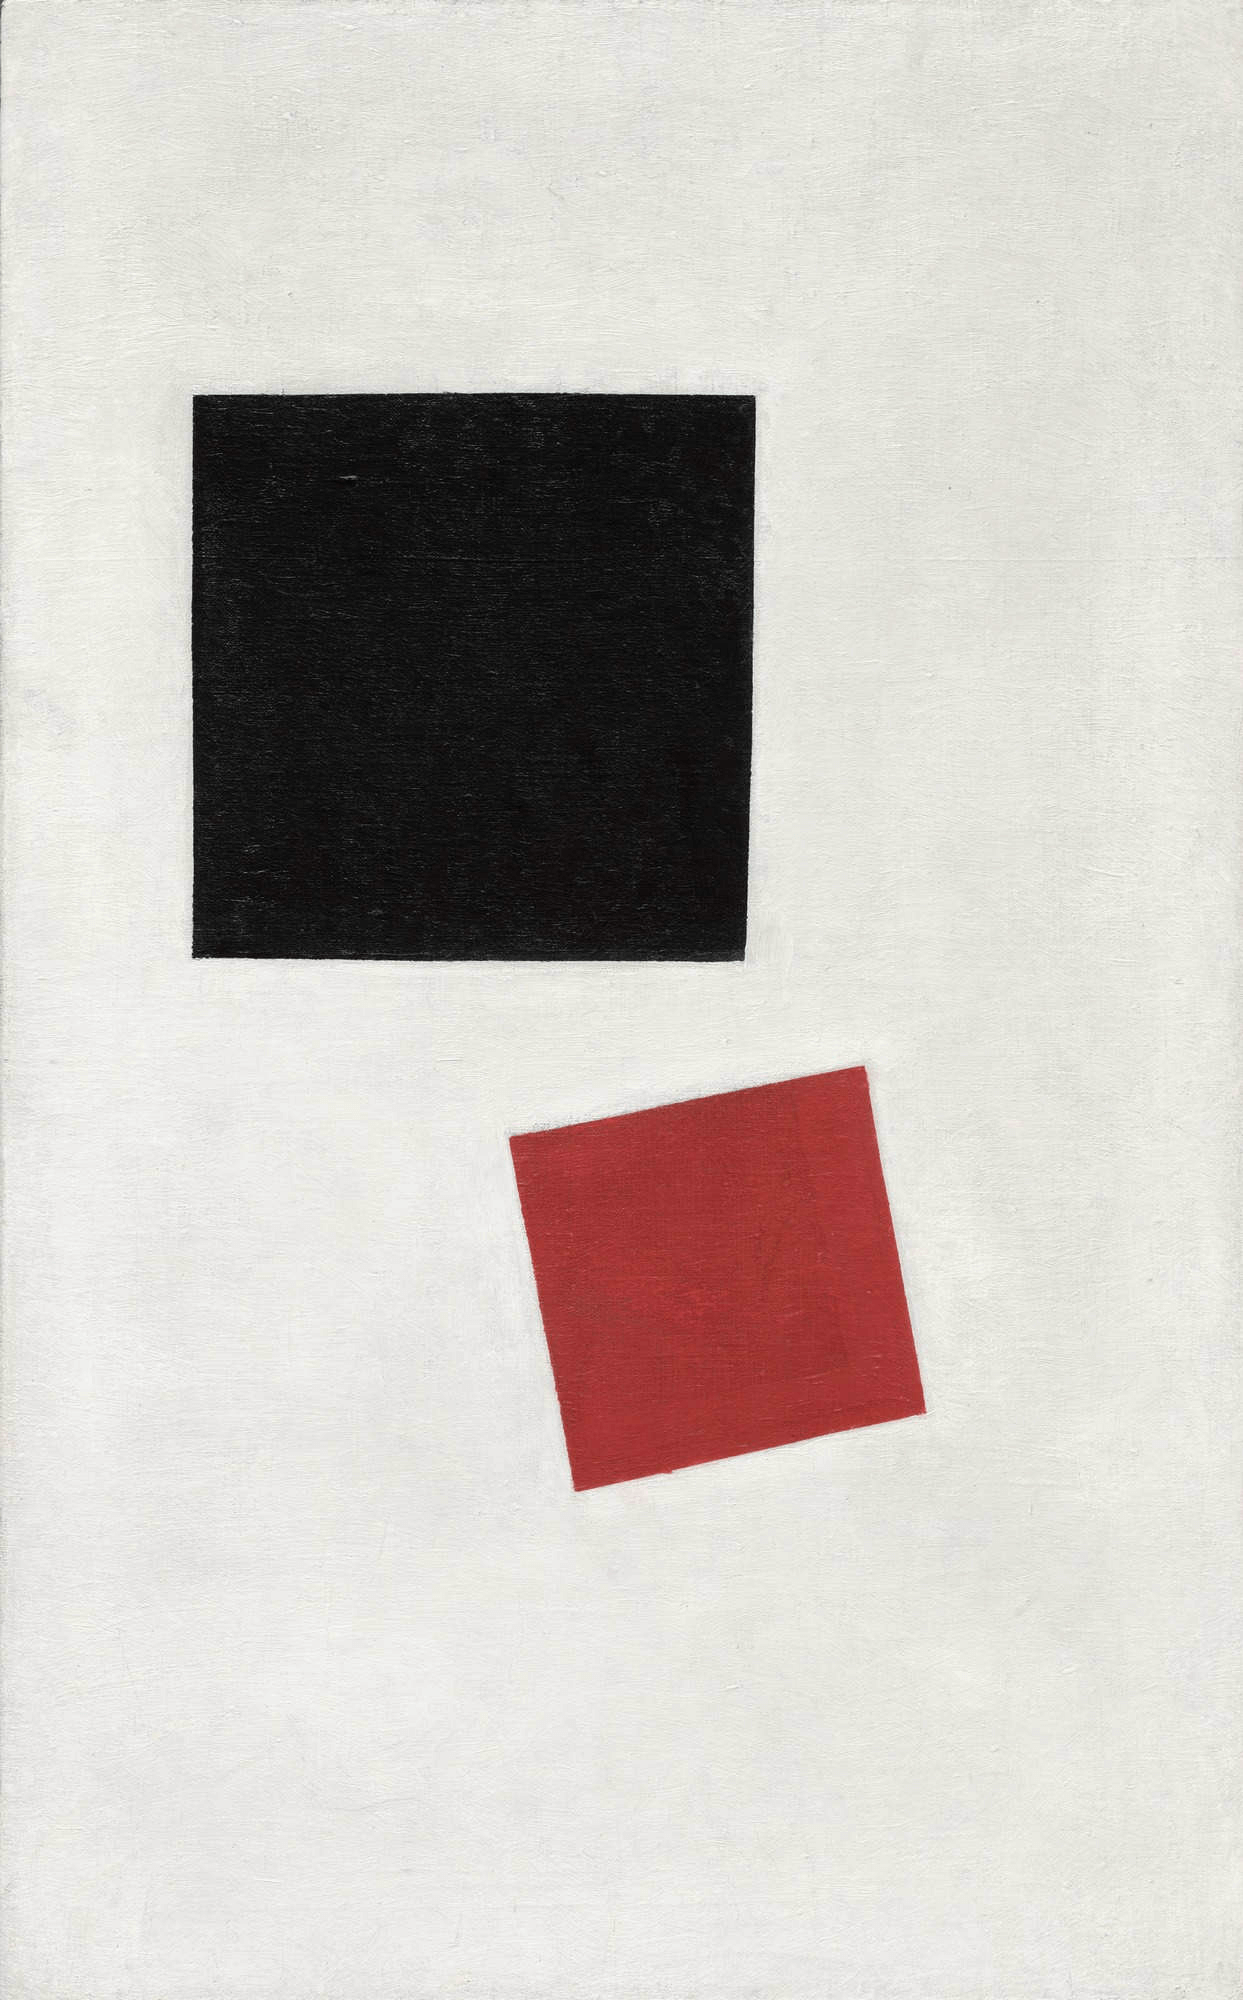 Black Square and Red Square by Kazimir Malevich